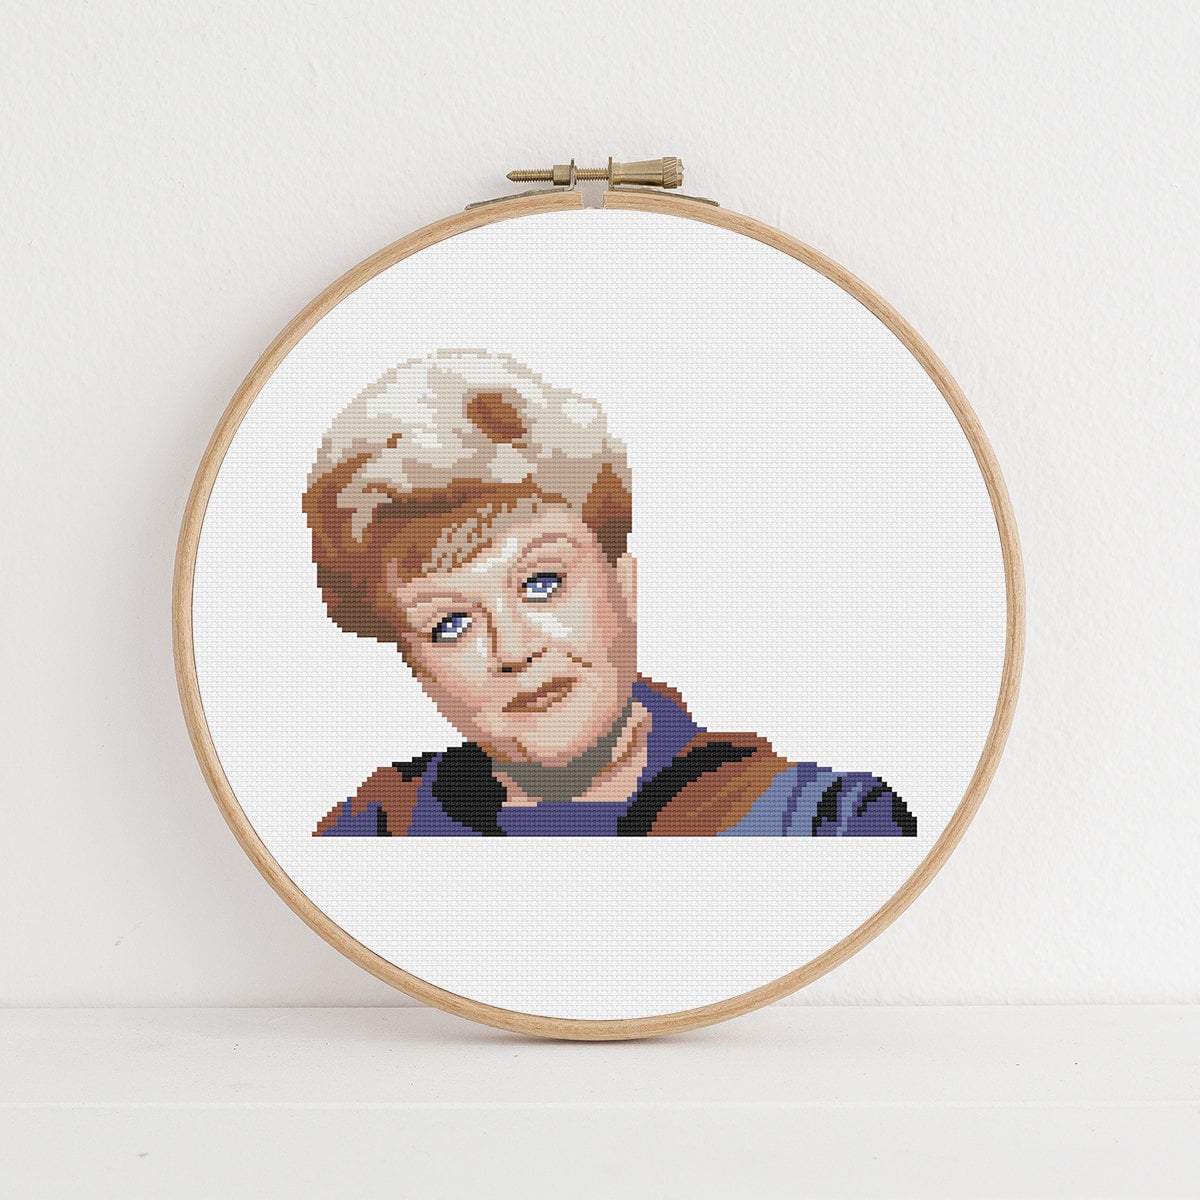 Murder She Wrote Pen Sets – Mugsby